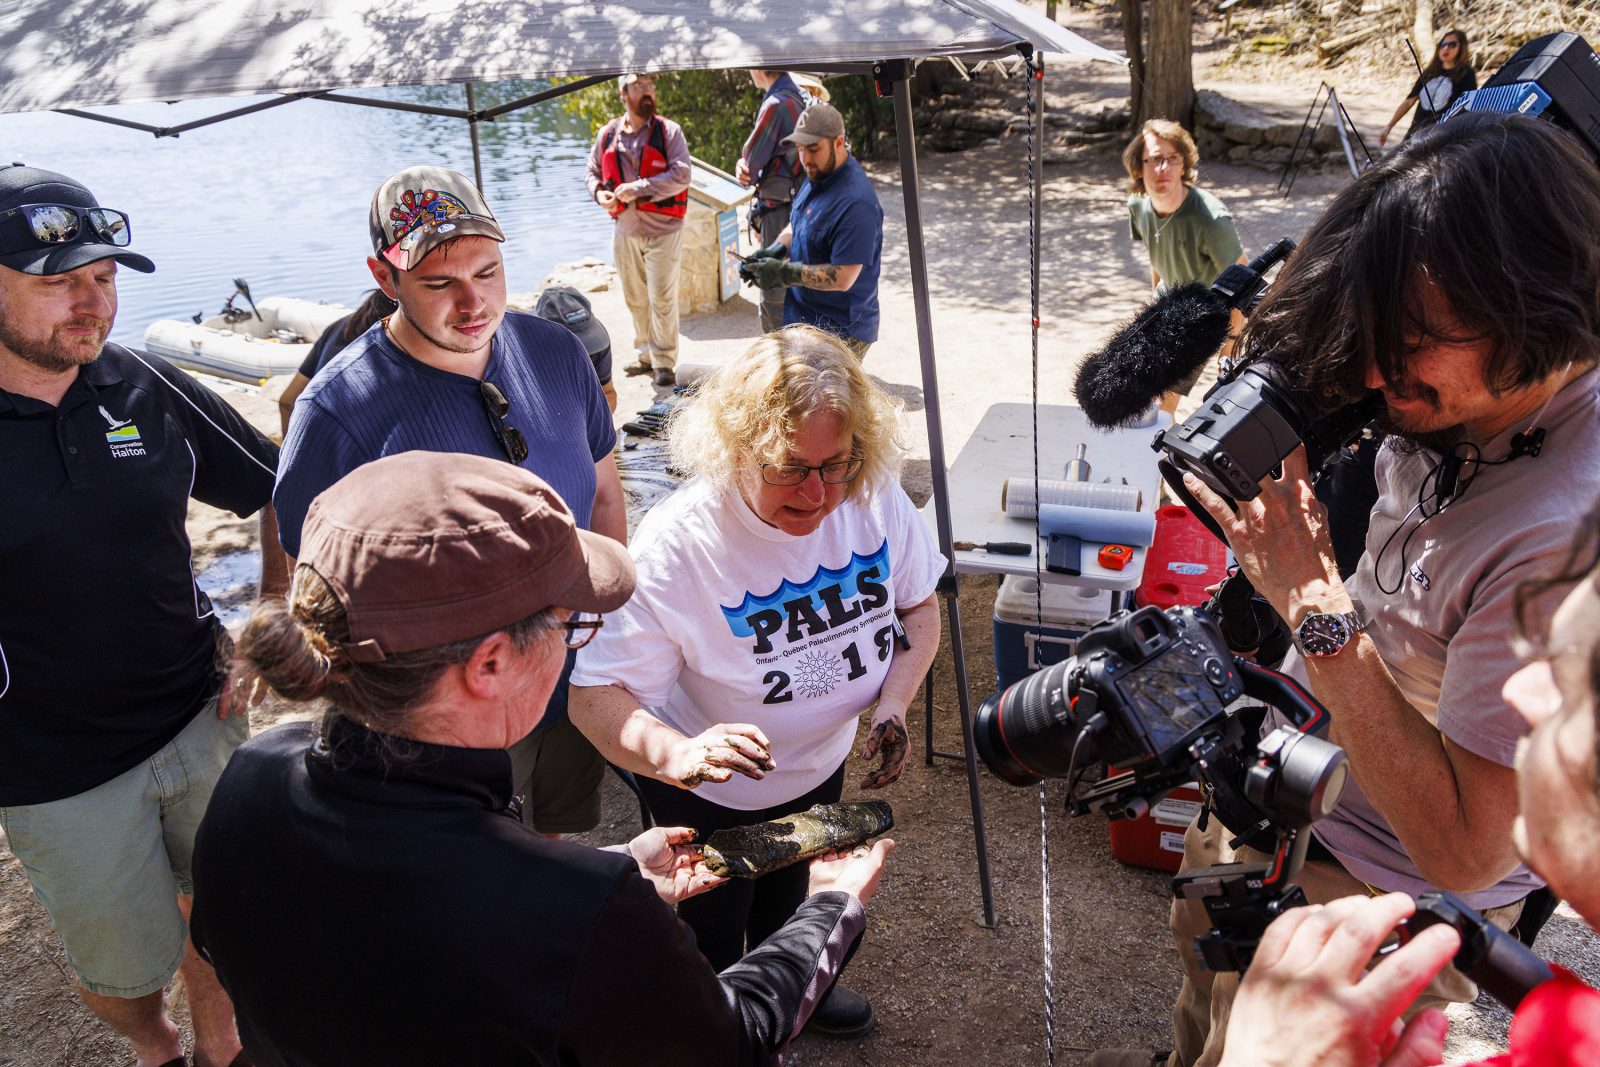 University Professor of Earth Sciences Francine McCarthy (centre) points to a slab being held by a woman wering a cap and black shirt, with two cameras pointing at them while members of the research team look on.